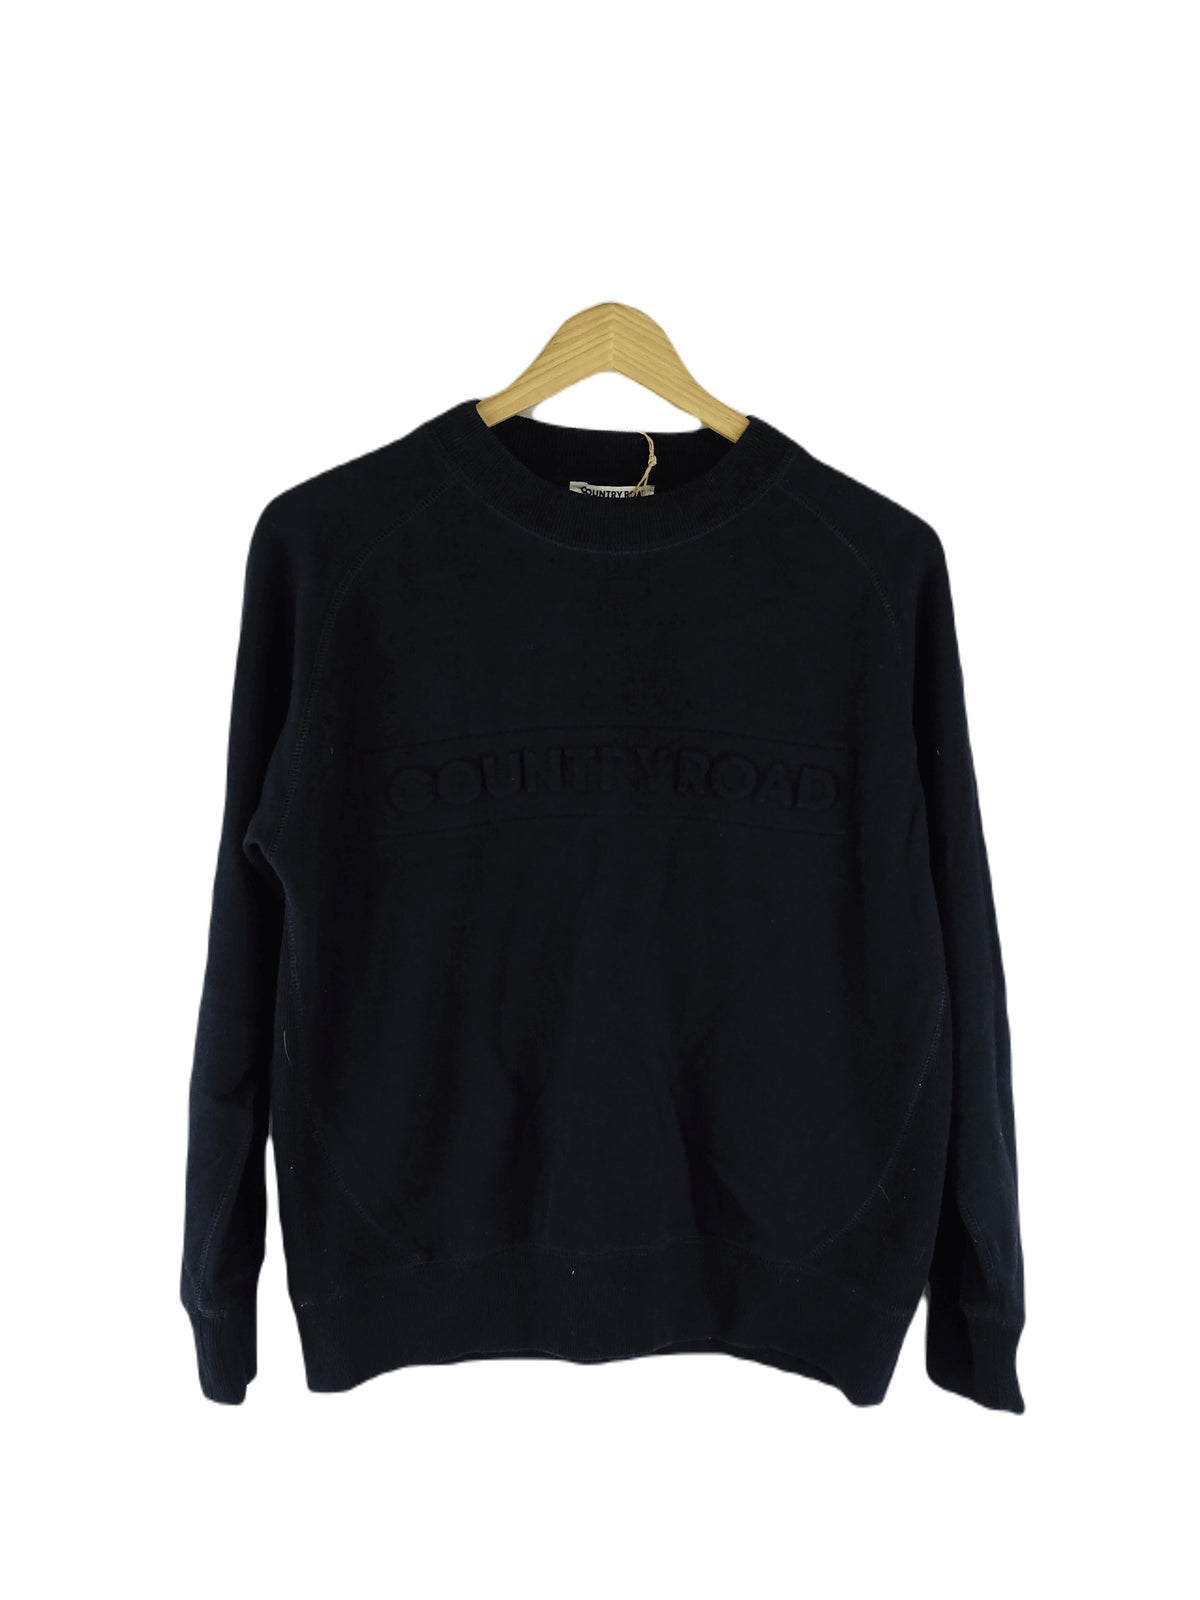 Country Road Black Crew Neck Jumper XS